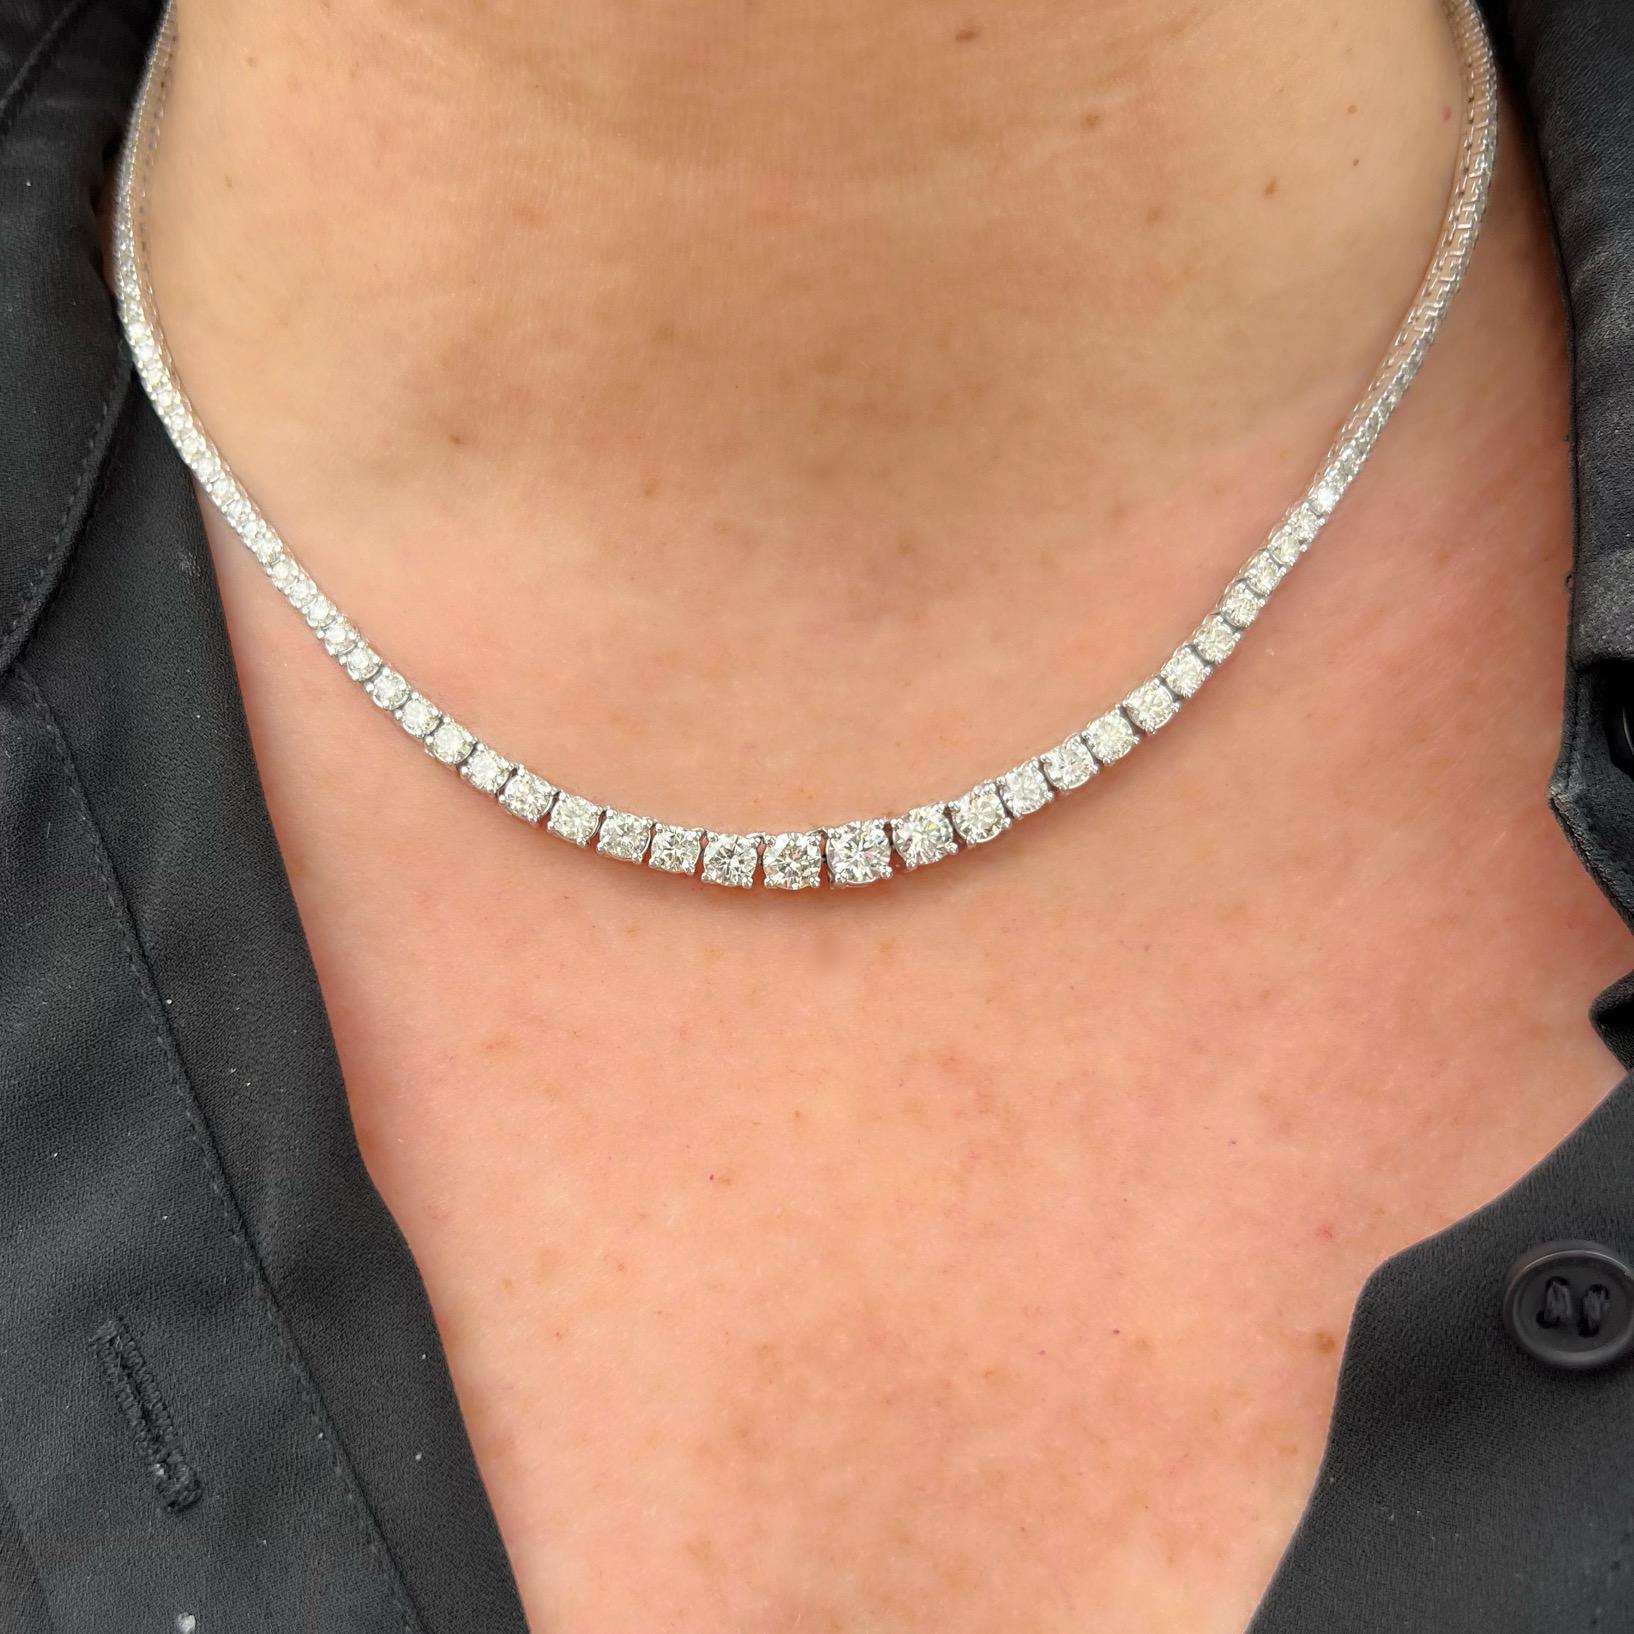 Perhaps the exact diamond line necklace you've been looking for! This 14k white gold stunner features 145 fine round brilliant natural diamonds expertly set in a four-prong style for maximum sparkle. The 145 white diamonds weigh approximately 9.48